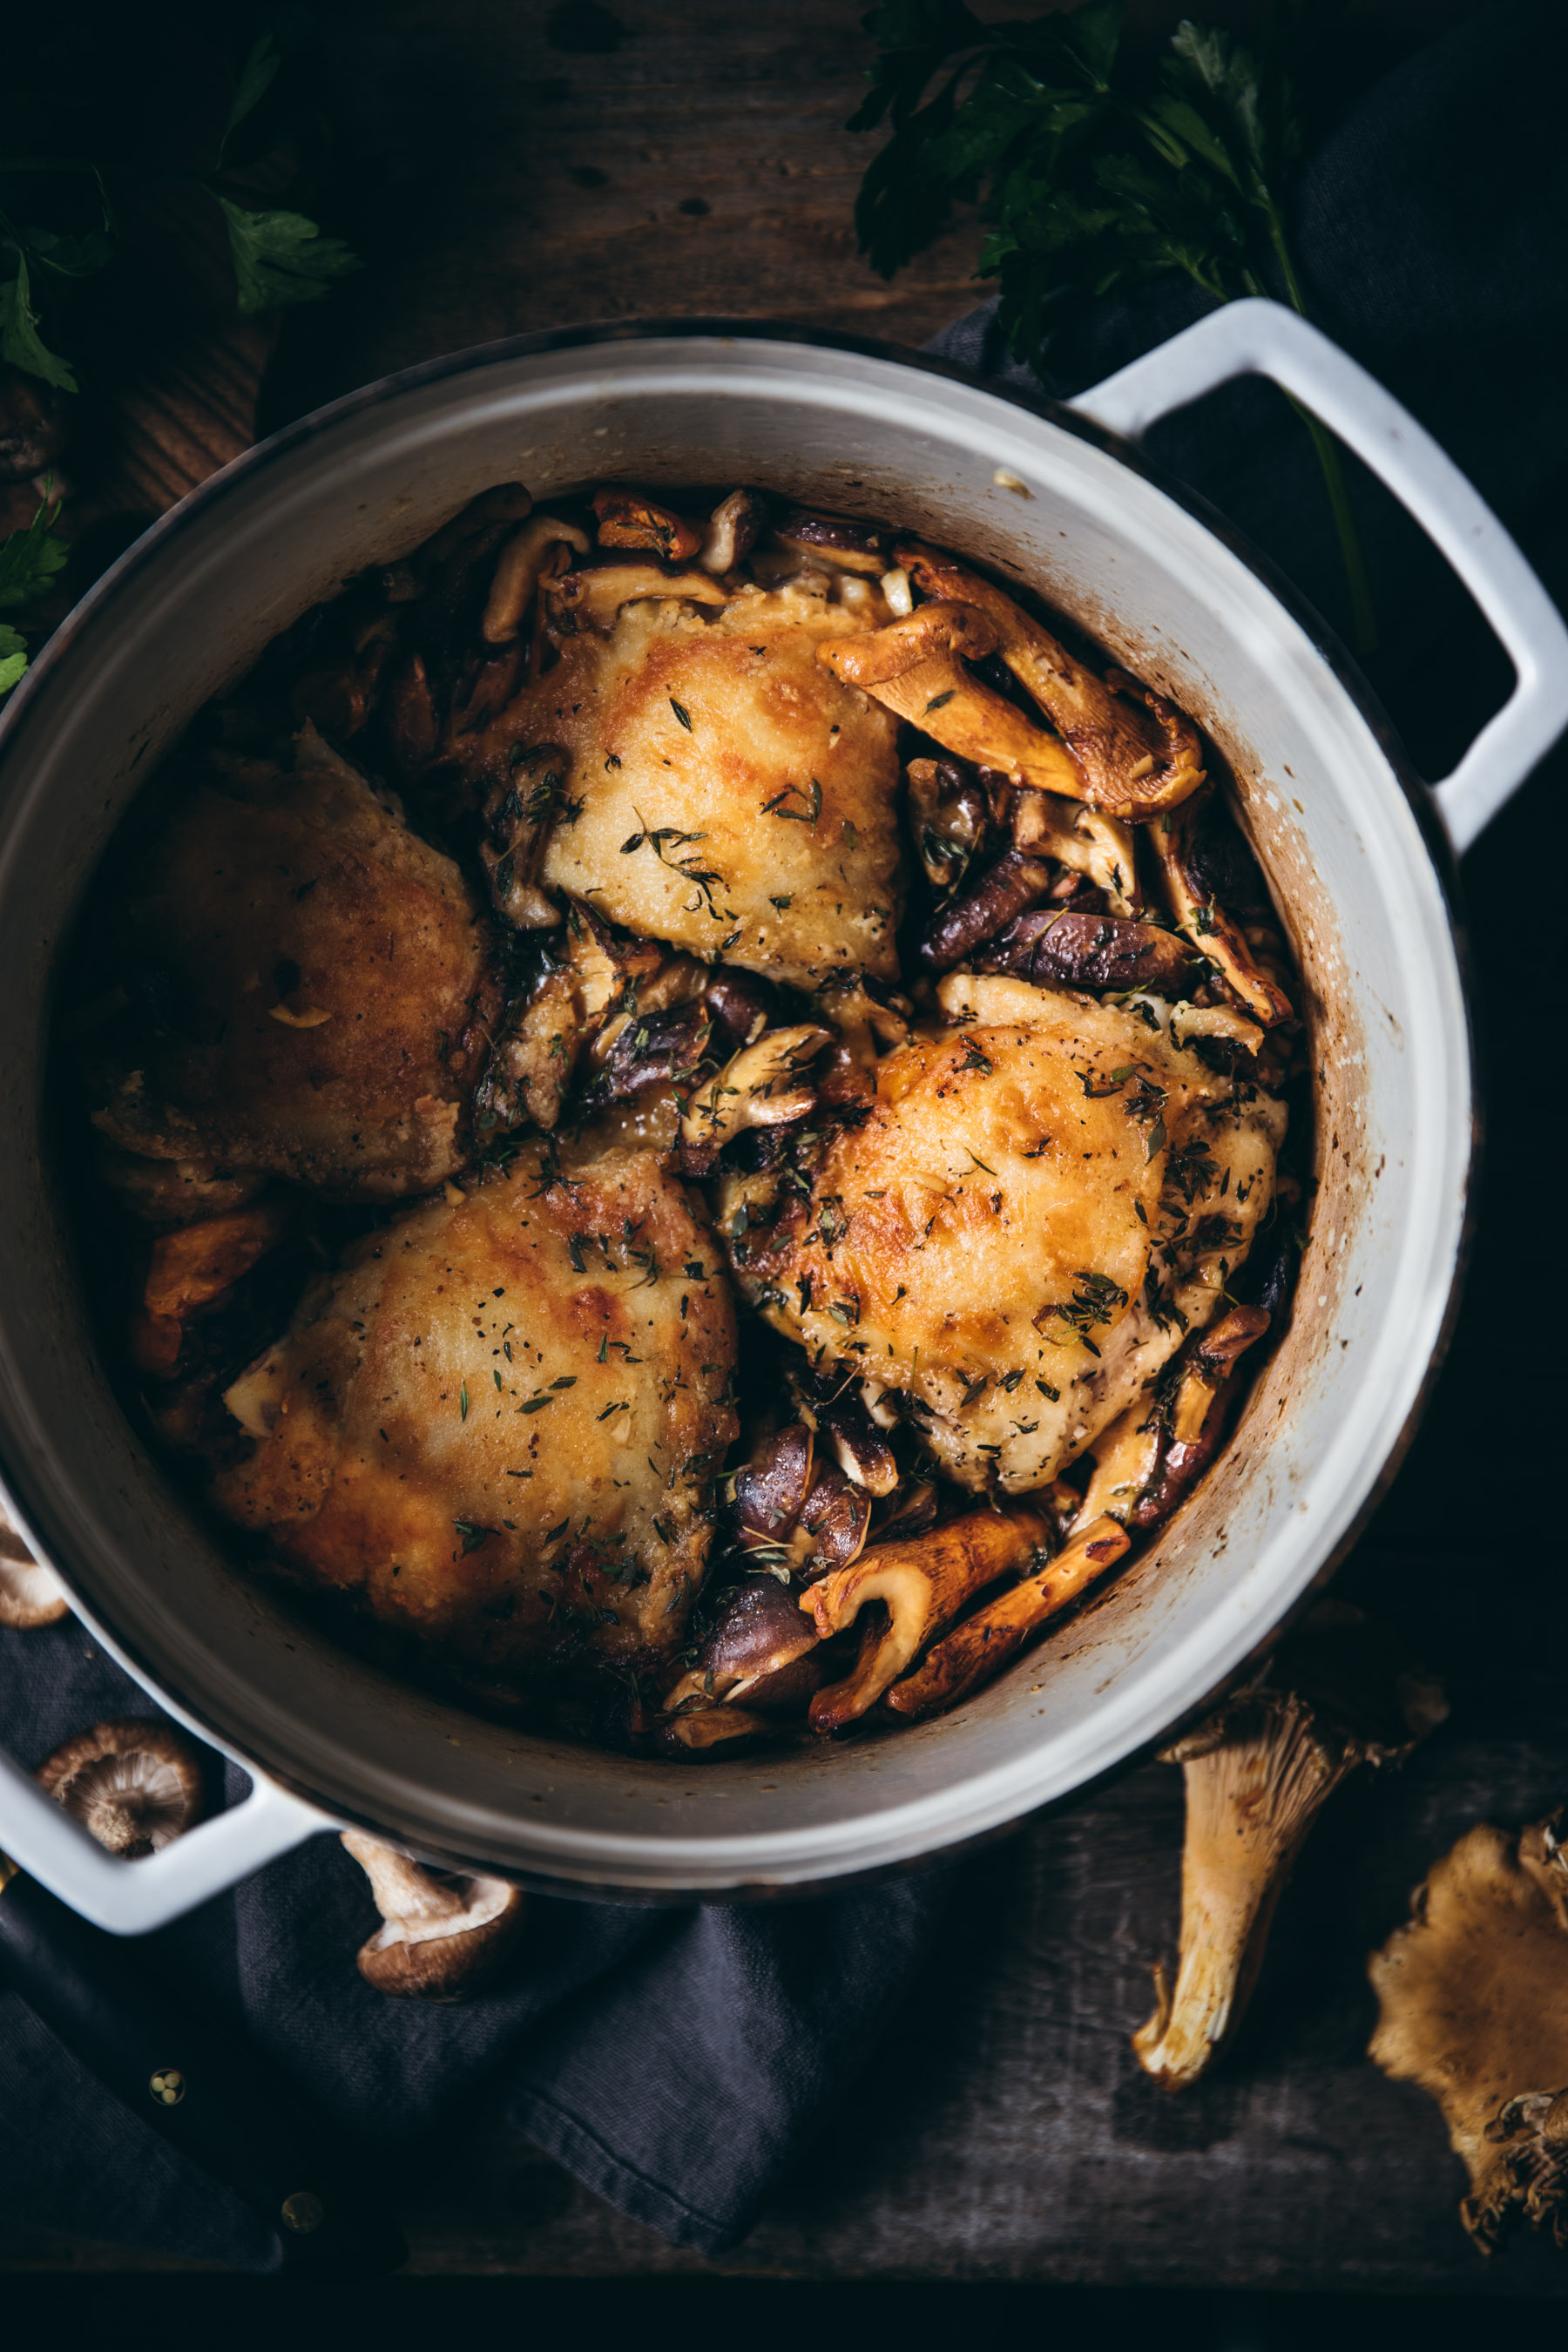 One Pot Chicken and Mushrooms